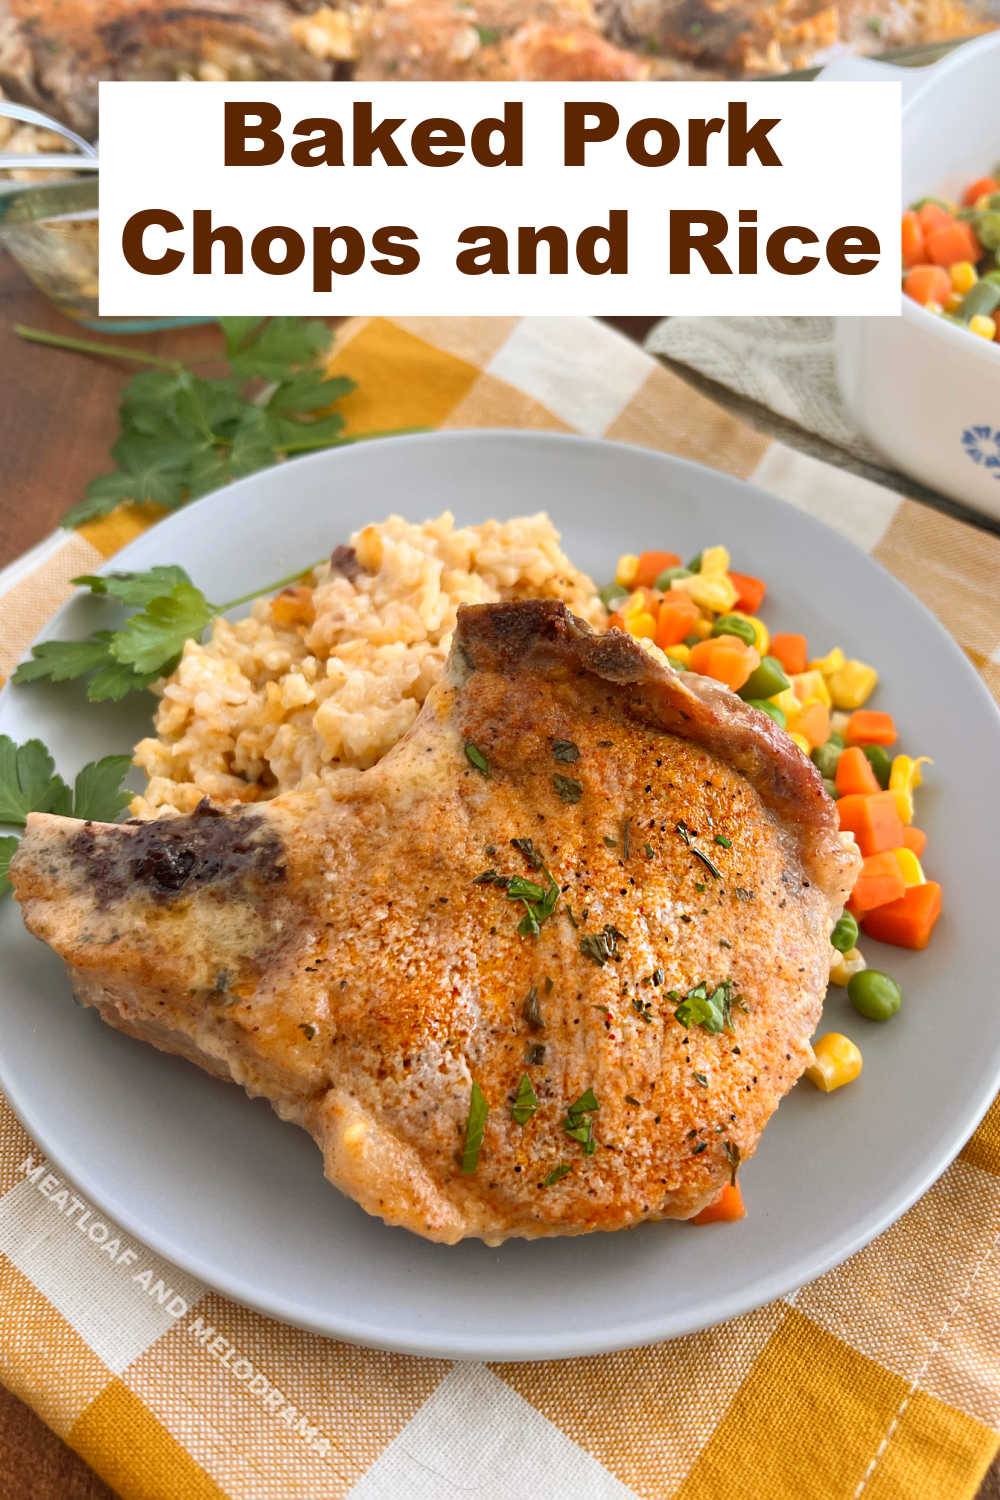 Mom's Baked Pork Chops and Rice is an easy dinner recipe made with tender pork chops and creamy white rice cooked together in one baking dish. This easy recipe is a family favorite that even picky eaters love! via @meamel